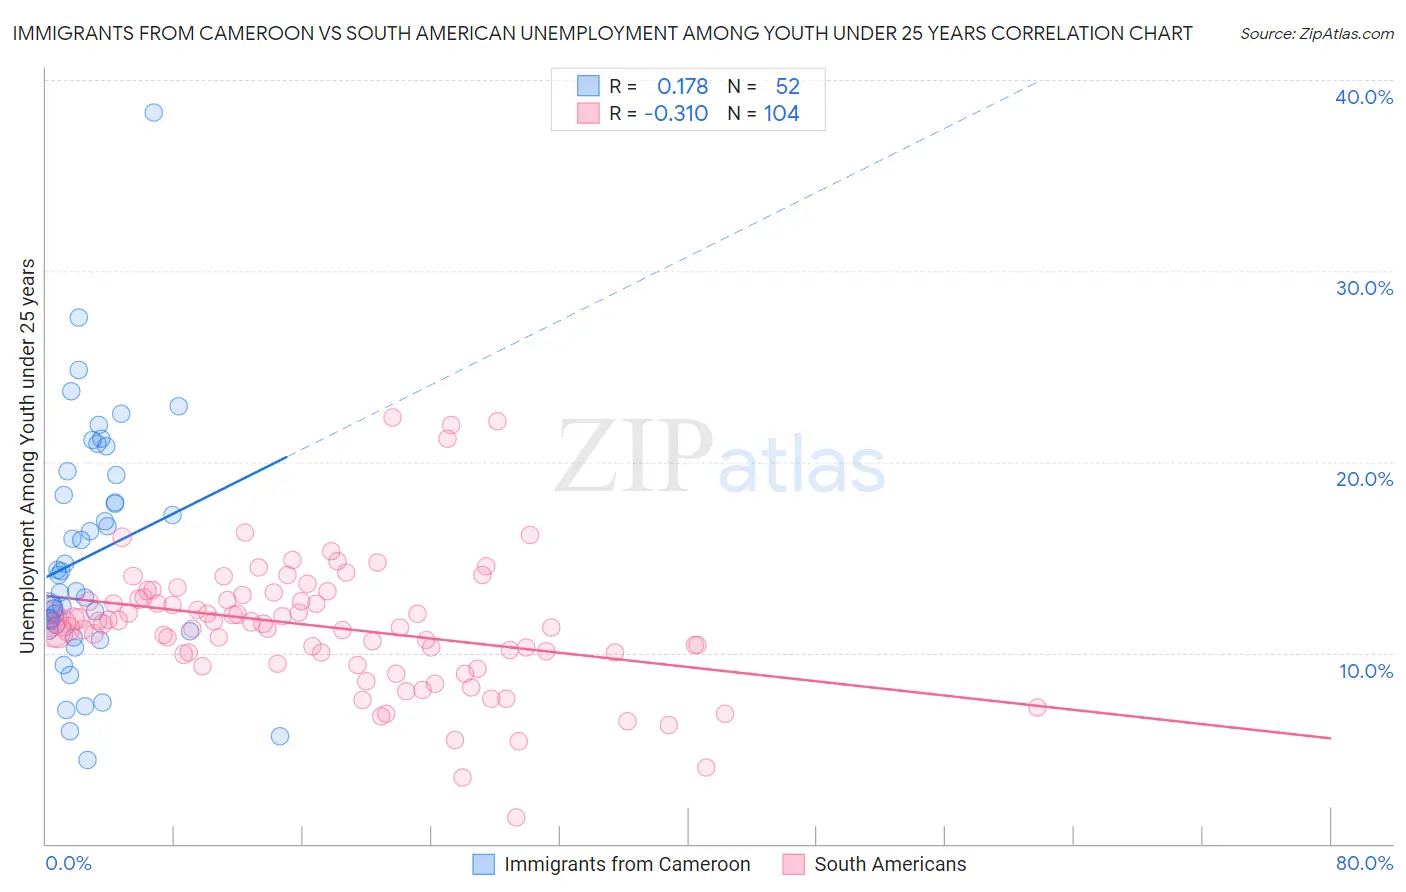 Immigrants from Cameroon vs South American Unemployment Among Youth under 25 years